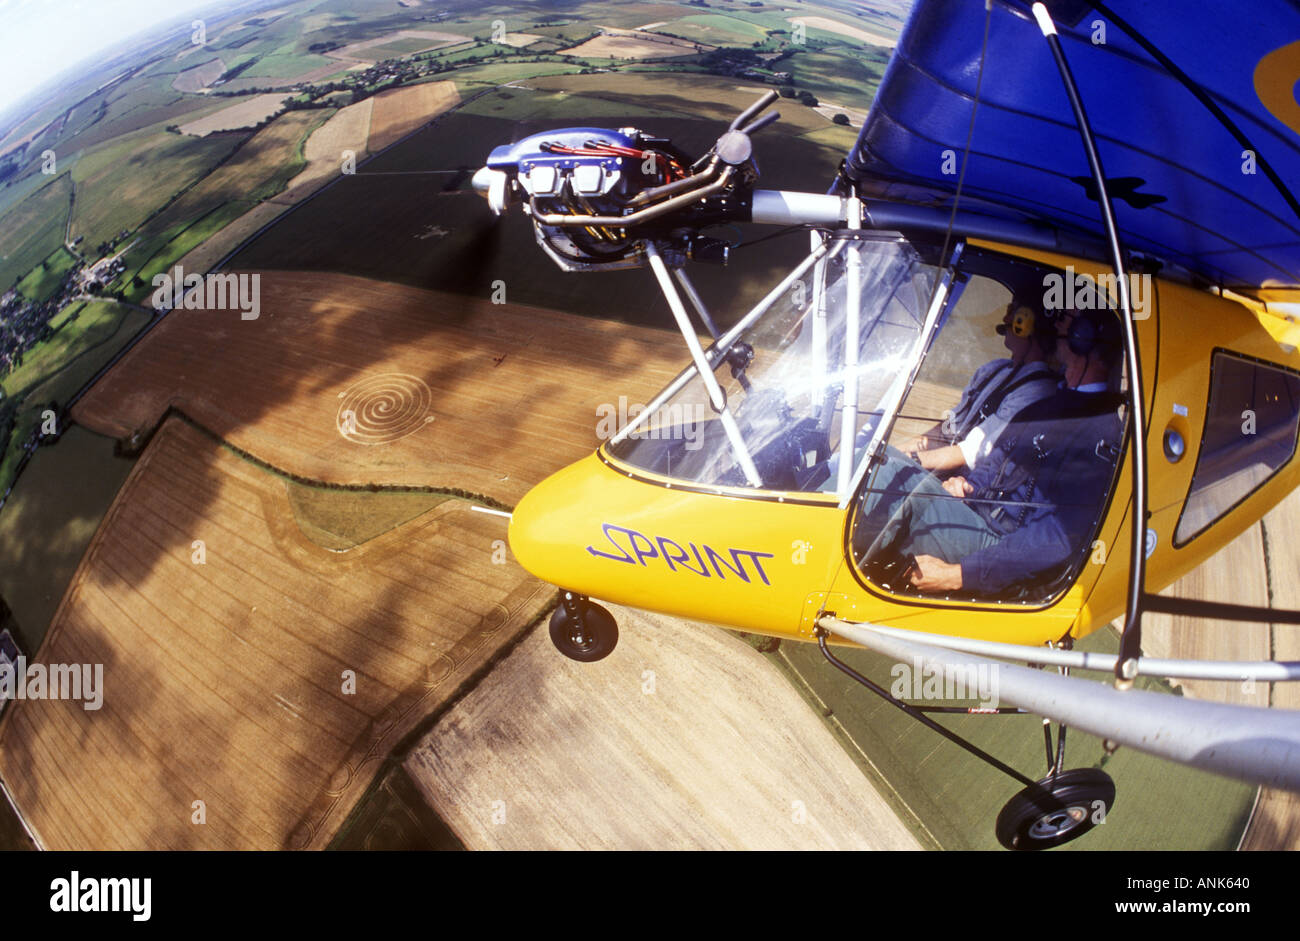 Thruster Sprint microlight aircraft over crop circles near Avebury in Wiltshire uk Stock Photo